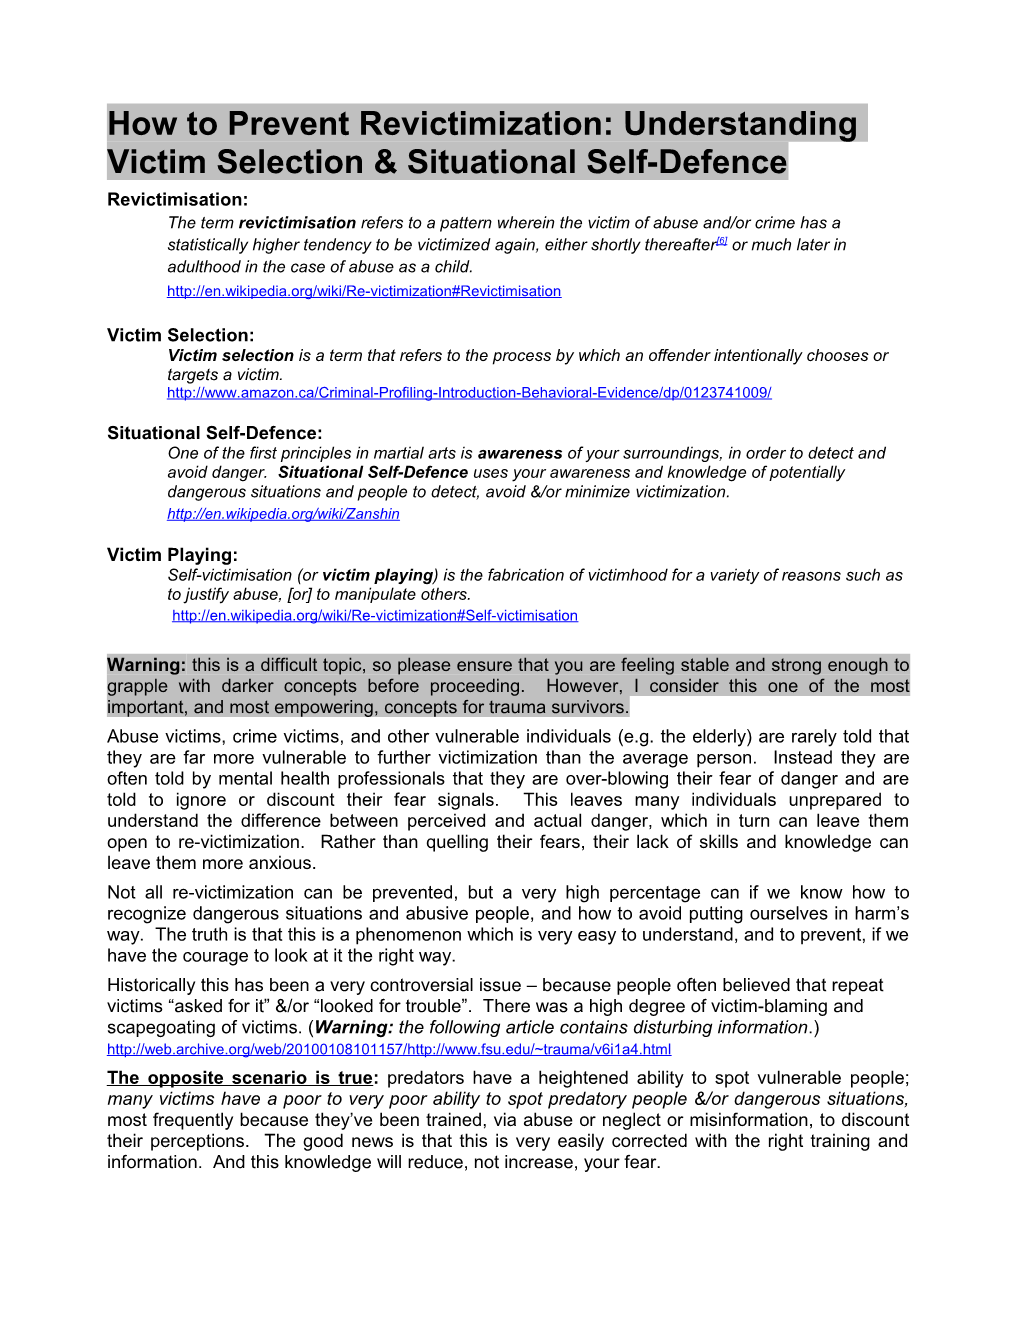 How to Prevent Revictimization: Understanding Victim Selection & Situational Self-Defence